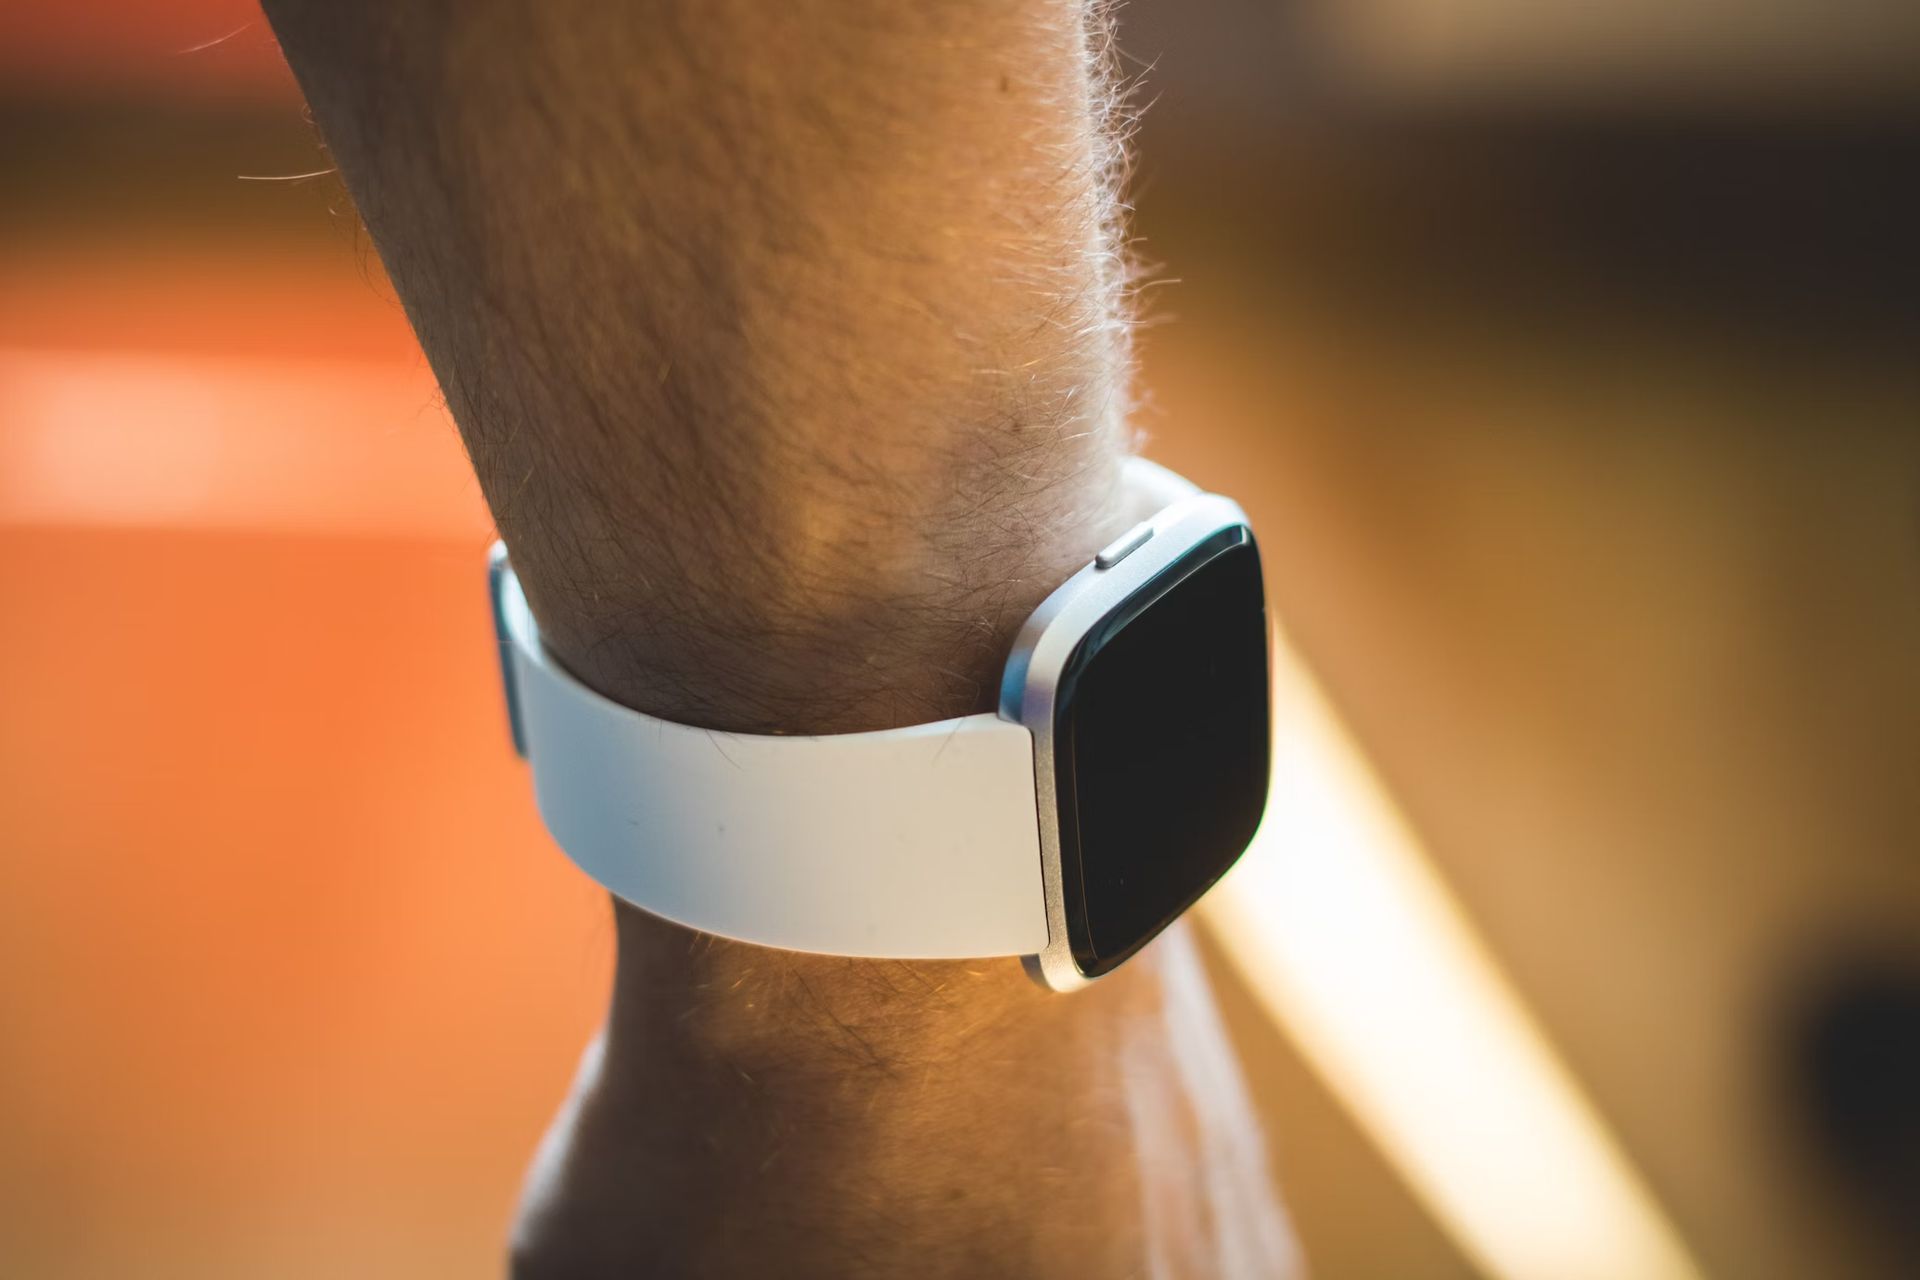 Fitbit's AI boost with Google's Health LLM